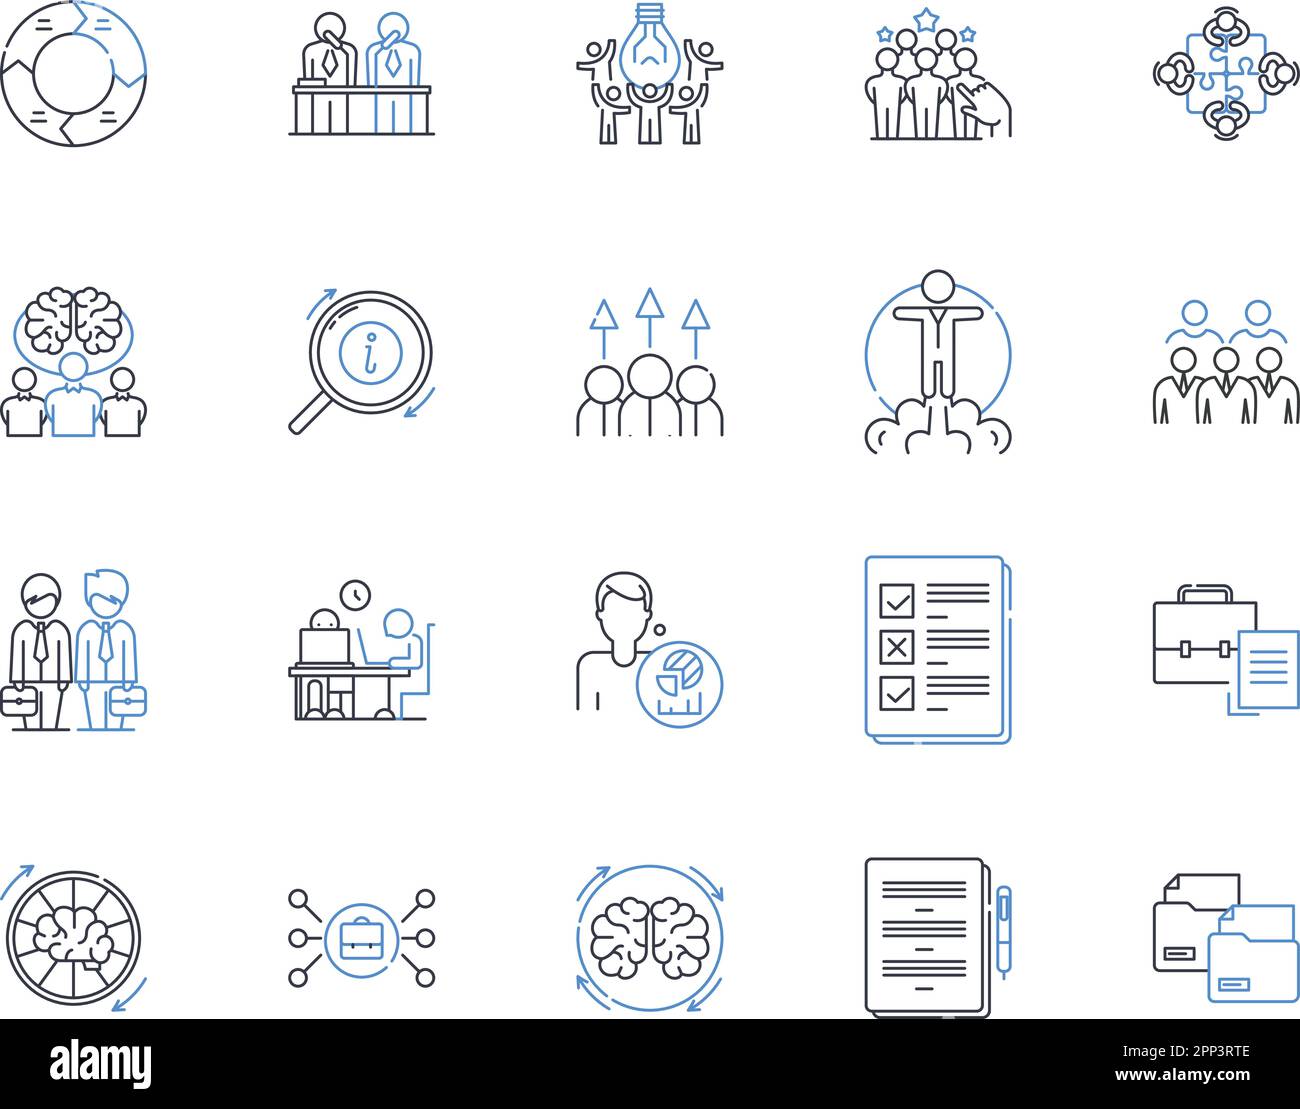 Production planning line icons collection. Efficiency, Optimization, Scheduling, Resource allocation, Demand forecasting, Lead time, Quality control Stock Vector